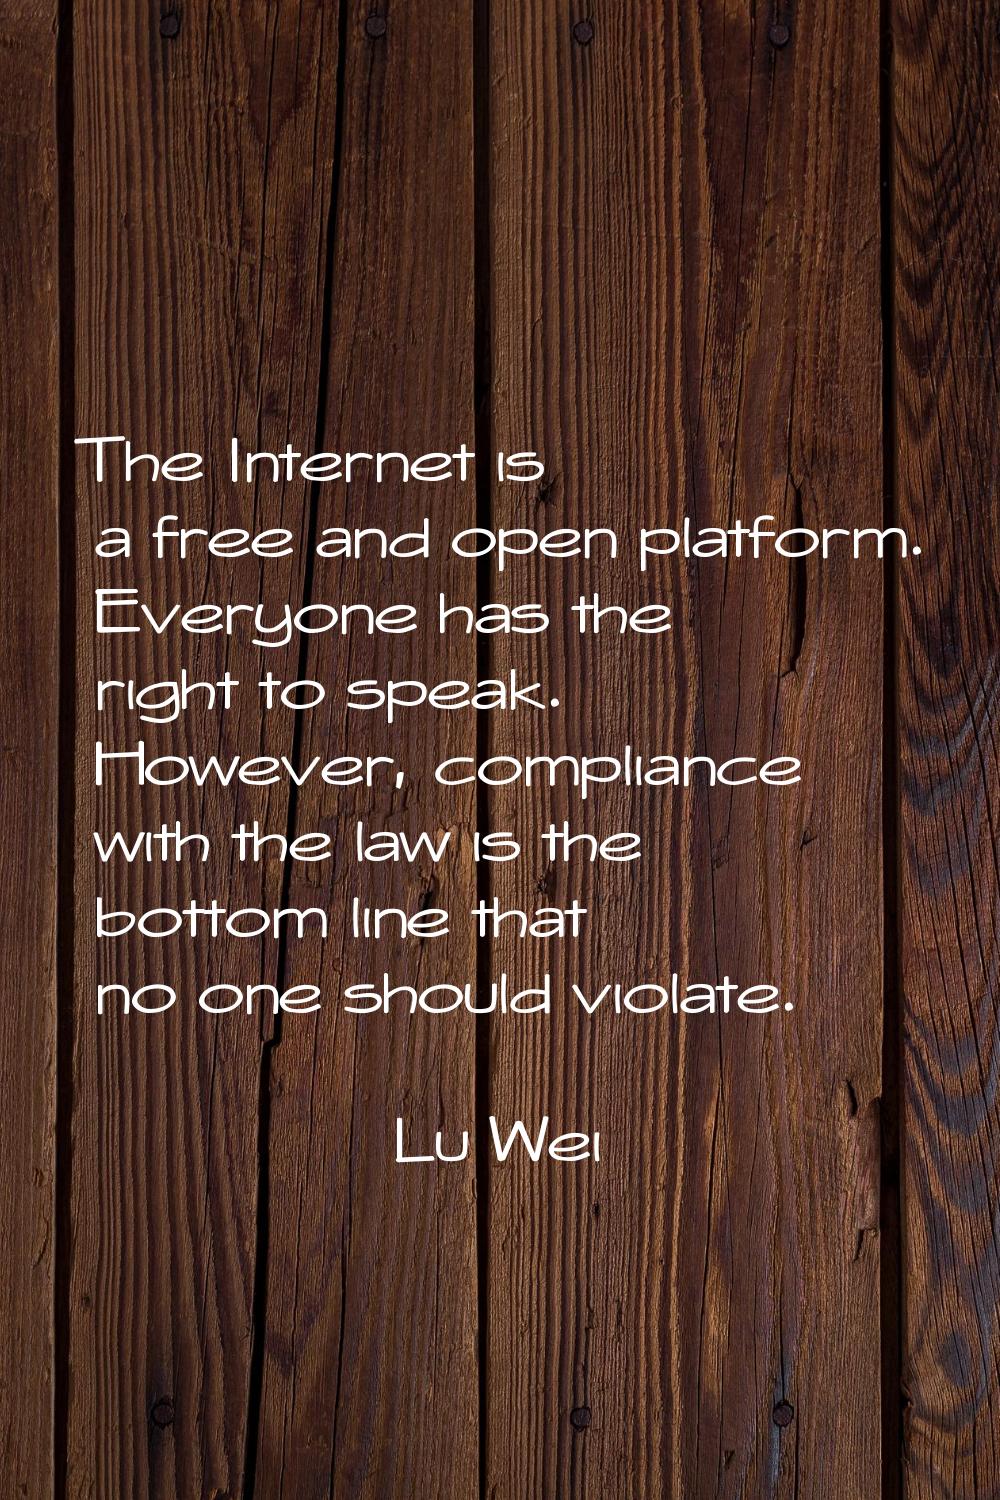 The Internet is a free and open platform. Everyone has the right to speak. However, compliance with